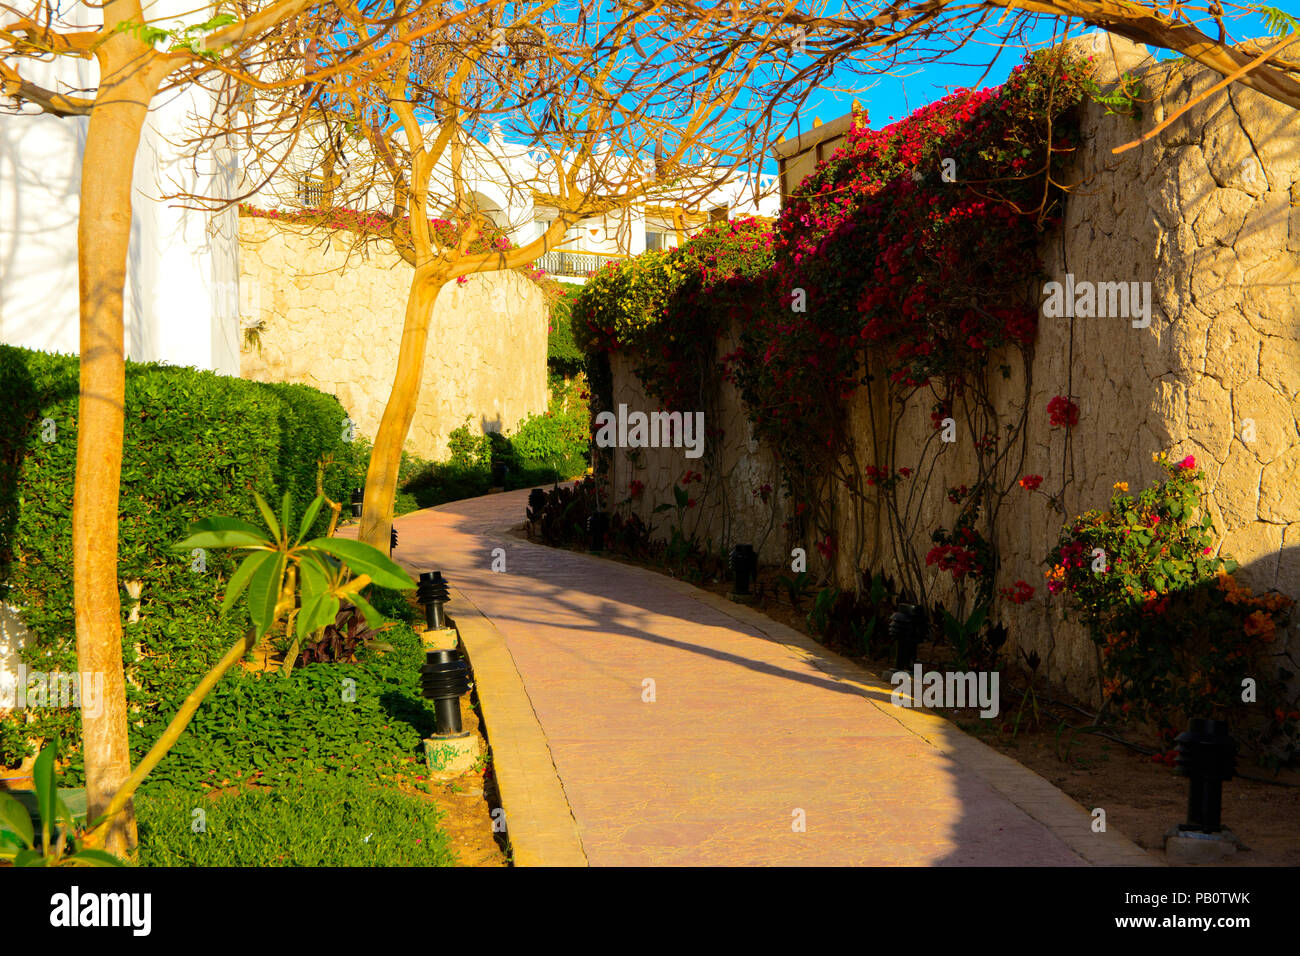 Sharm el-Sheikh, Egypt - March 14, 2018. The courtyards of a magnificent white hotel on a summer day. The concept of tourism, vacations and luxury rec Stock Photo